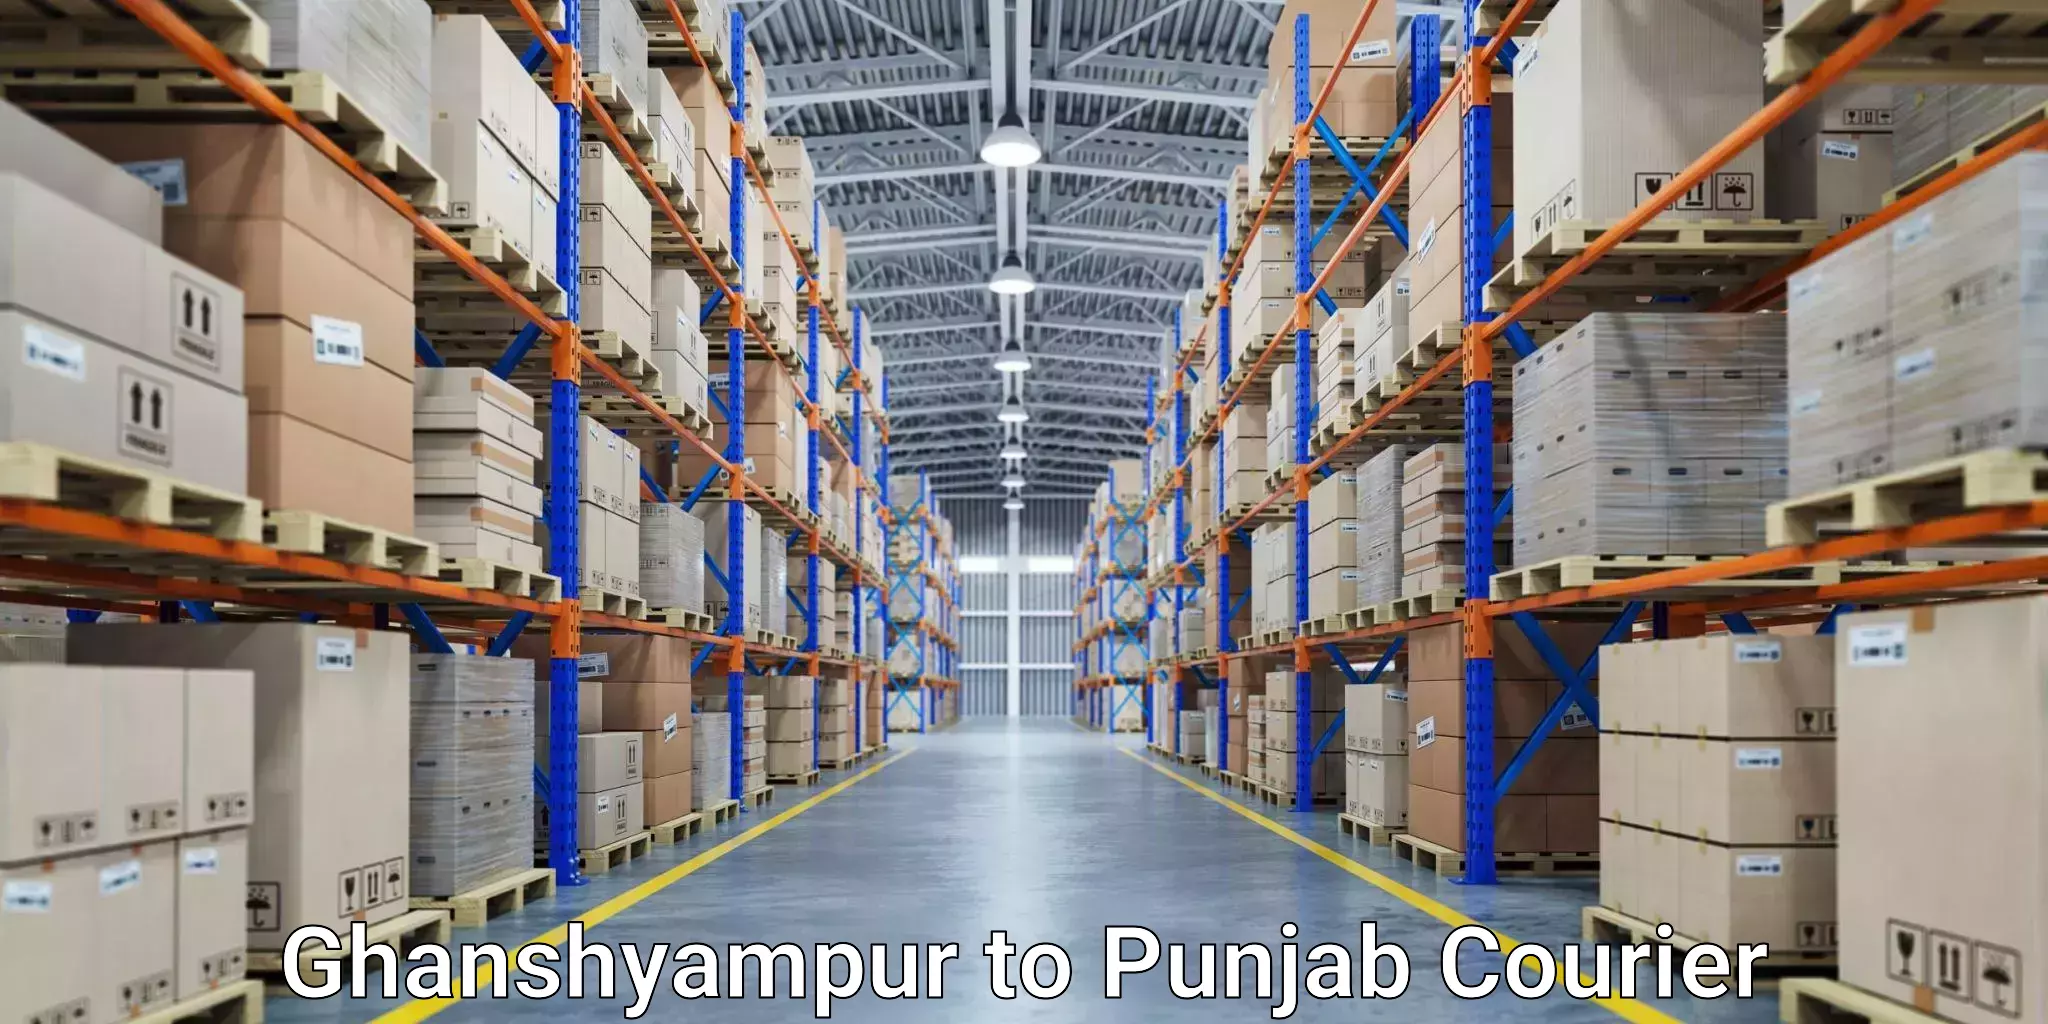 Fast delivery service Ghanshyampur to Goindwal Sahib